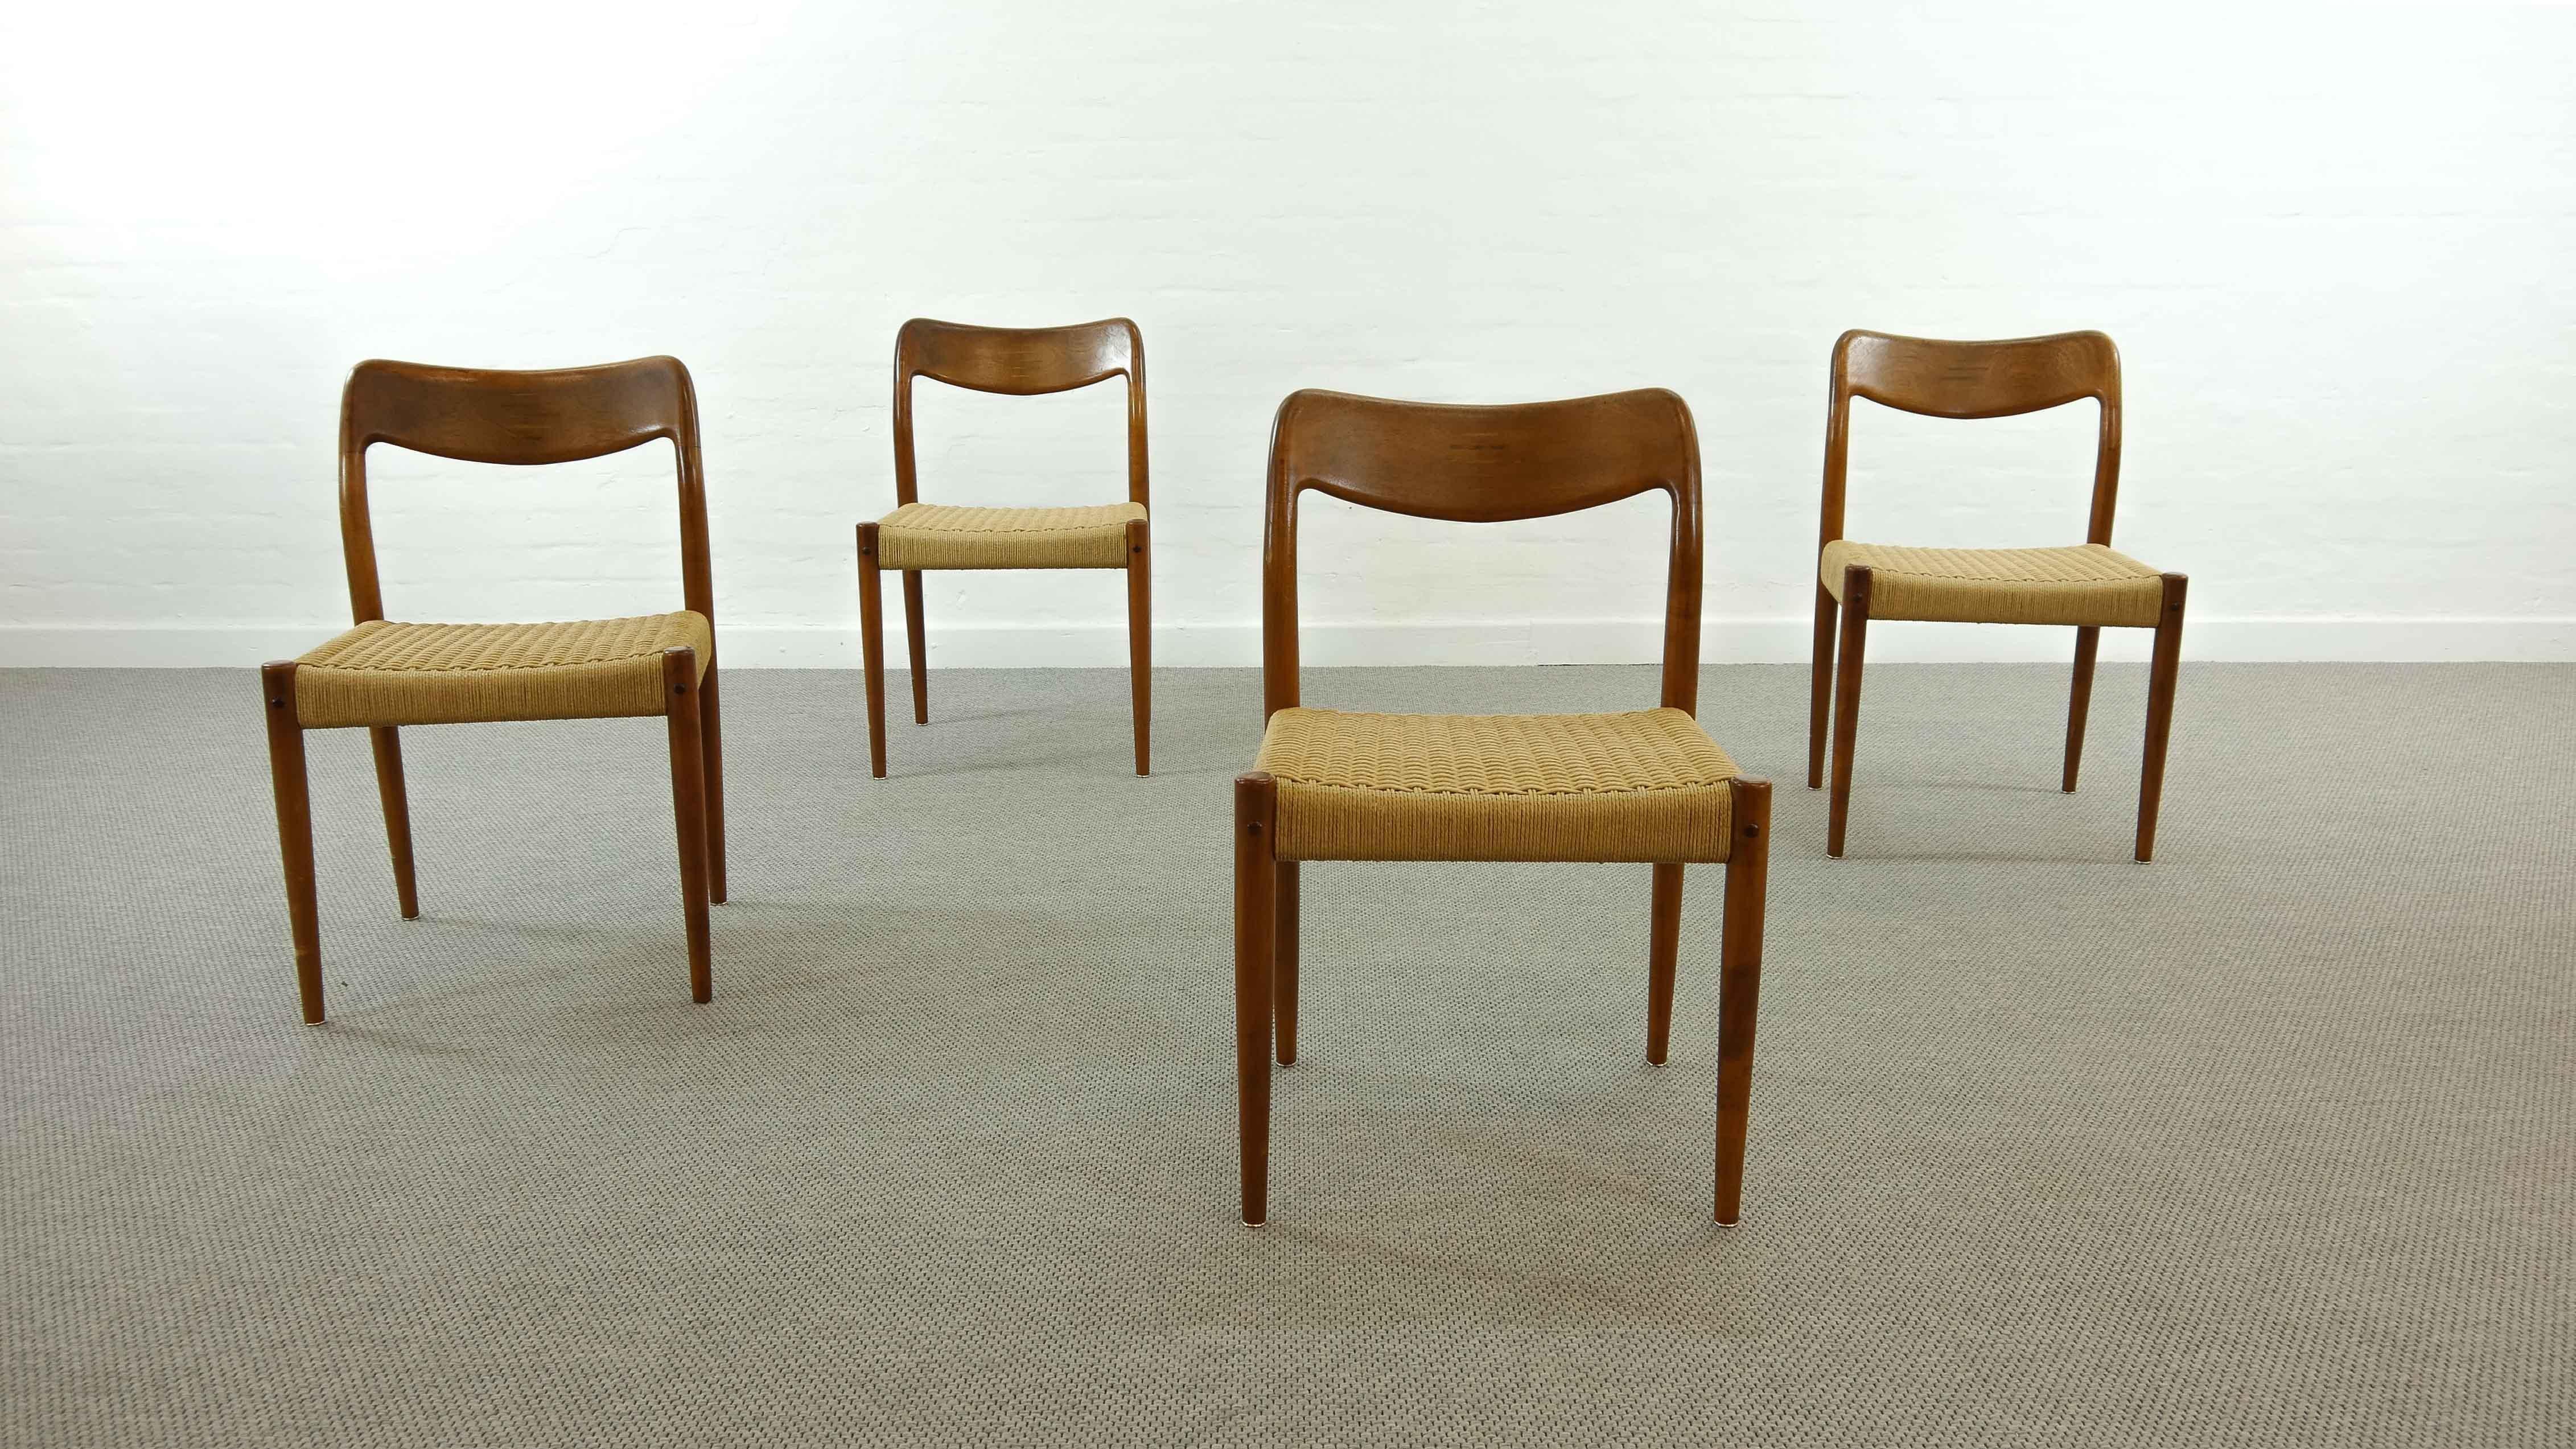 Set of 4 vintage teak chairs, designed by Johannes Andersen 60s for Uldum Møbelfabrik, Denmark. Chairs feature organic shaped backrests with horizontal inlayed joints. Papercord seat areas are in good condition.